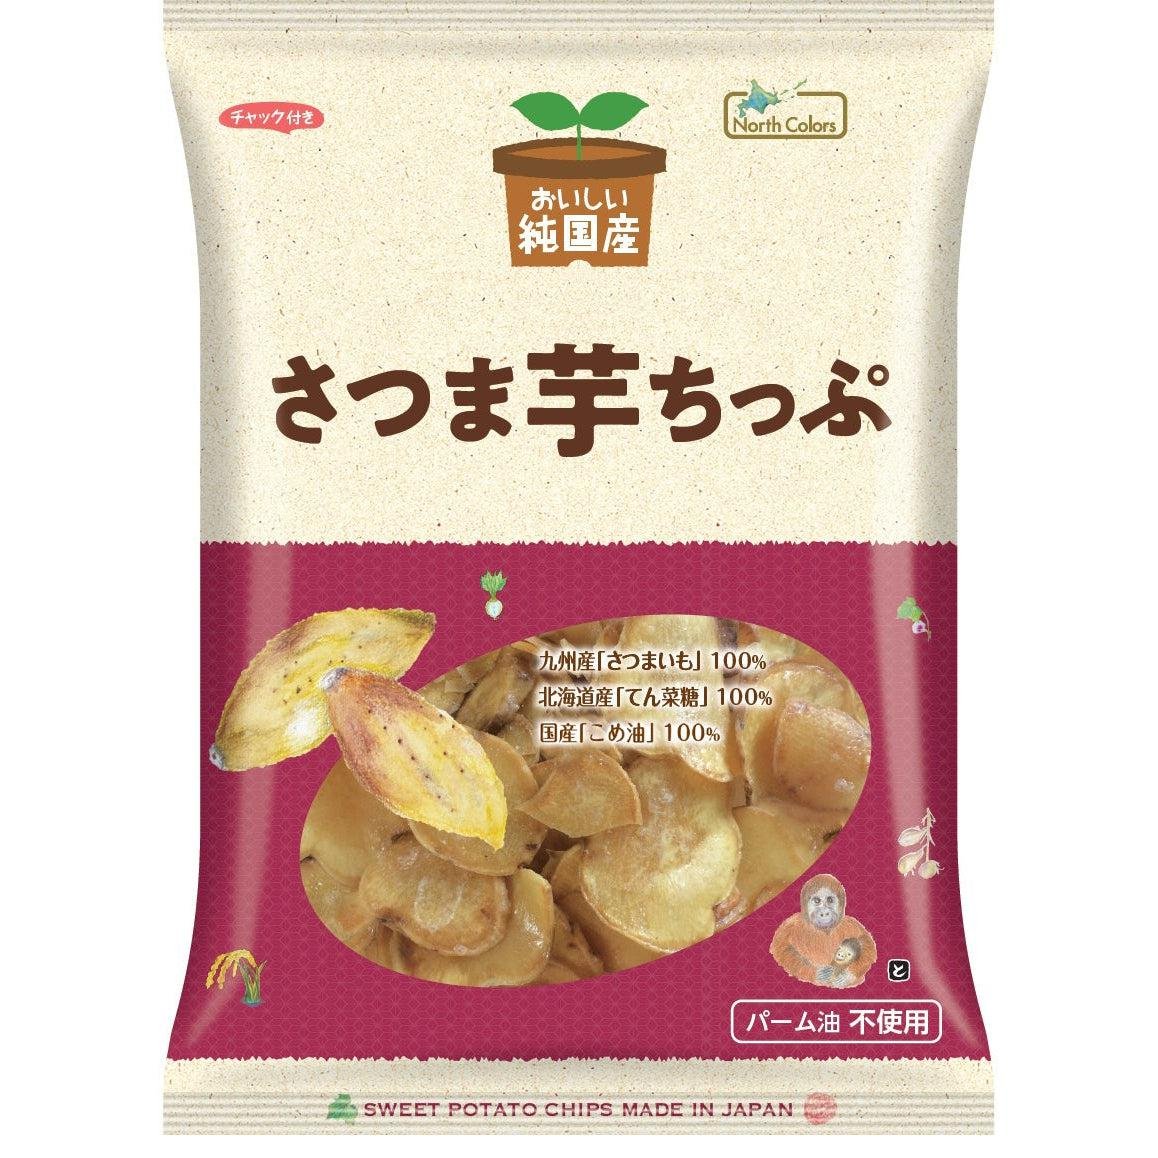 P-1-NCOL-SWPCHP-1:3-North Colors Japanese Sweet Potato Chips Additive-Free Satsumaimo Chips 115g (Pack of 3).jpg